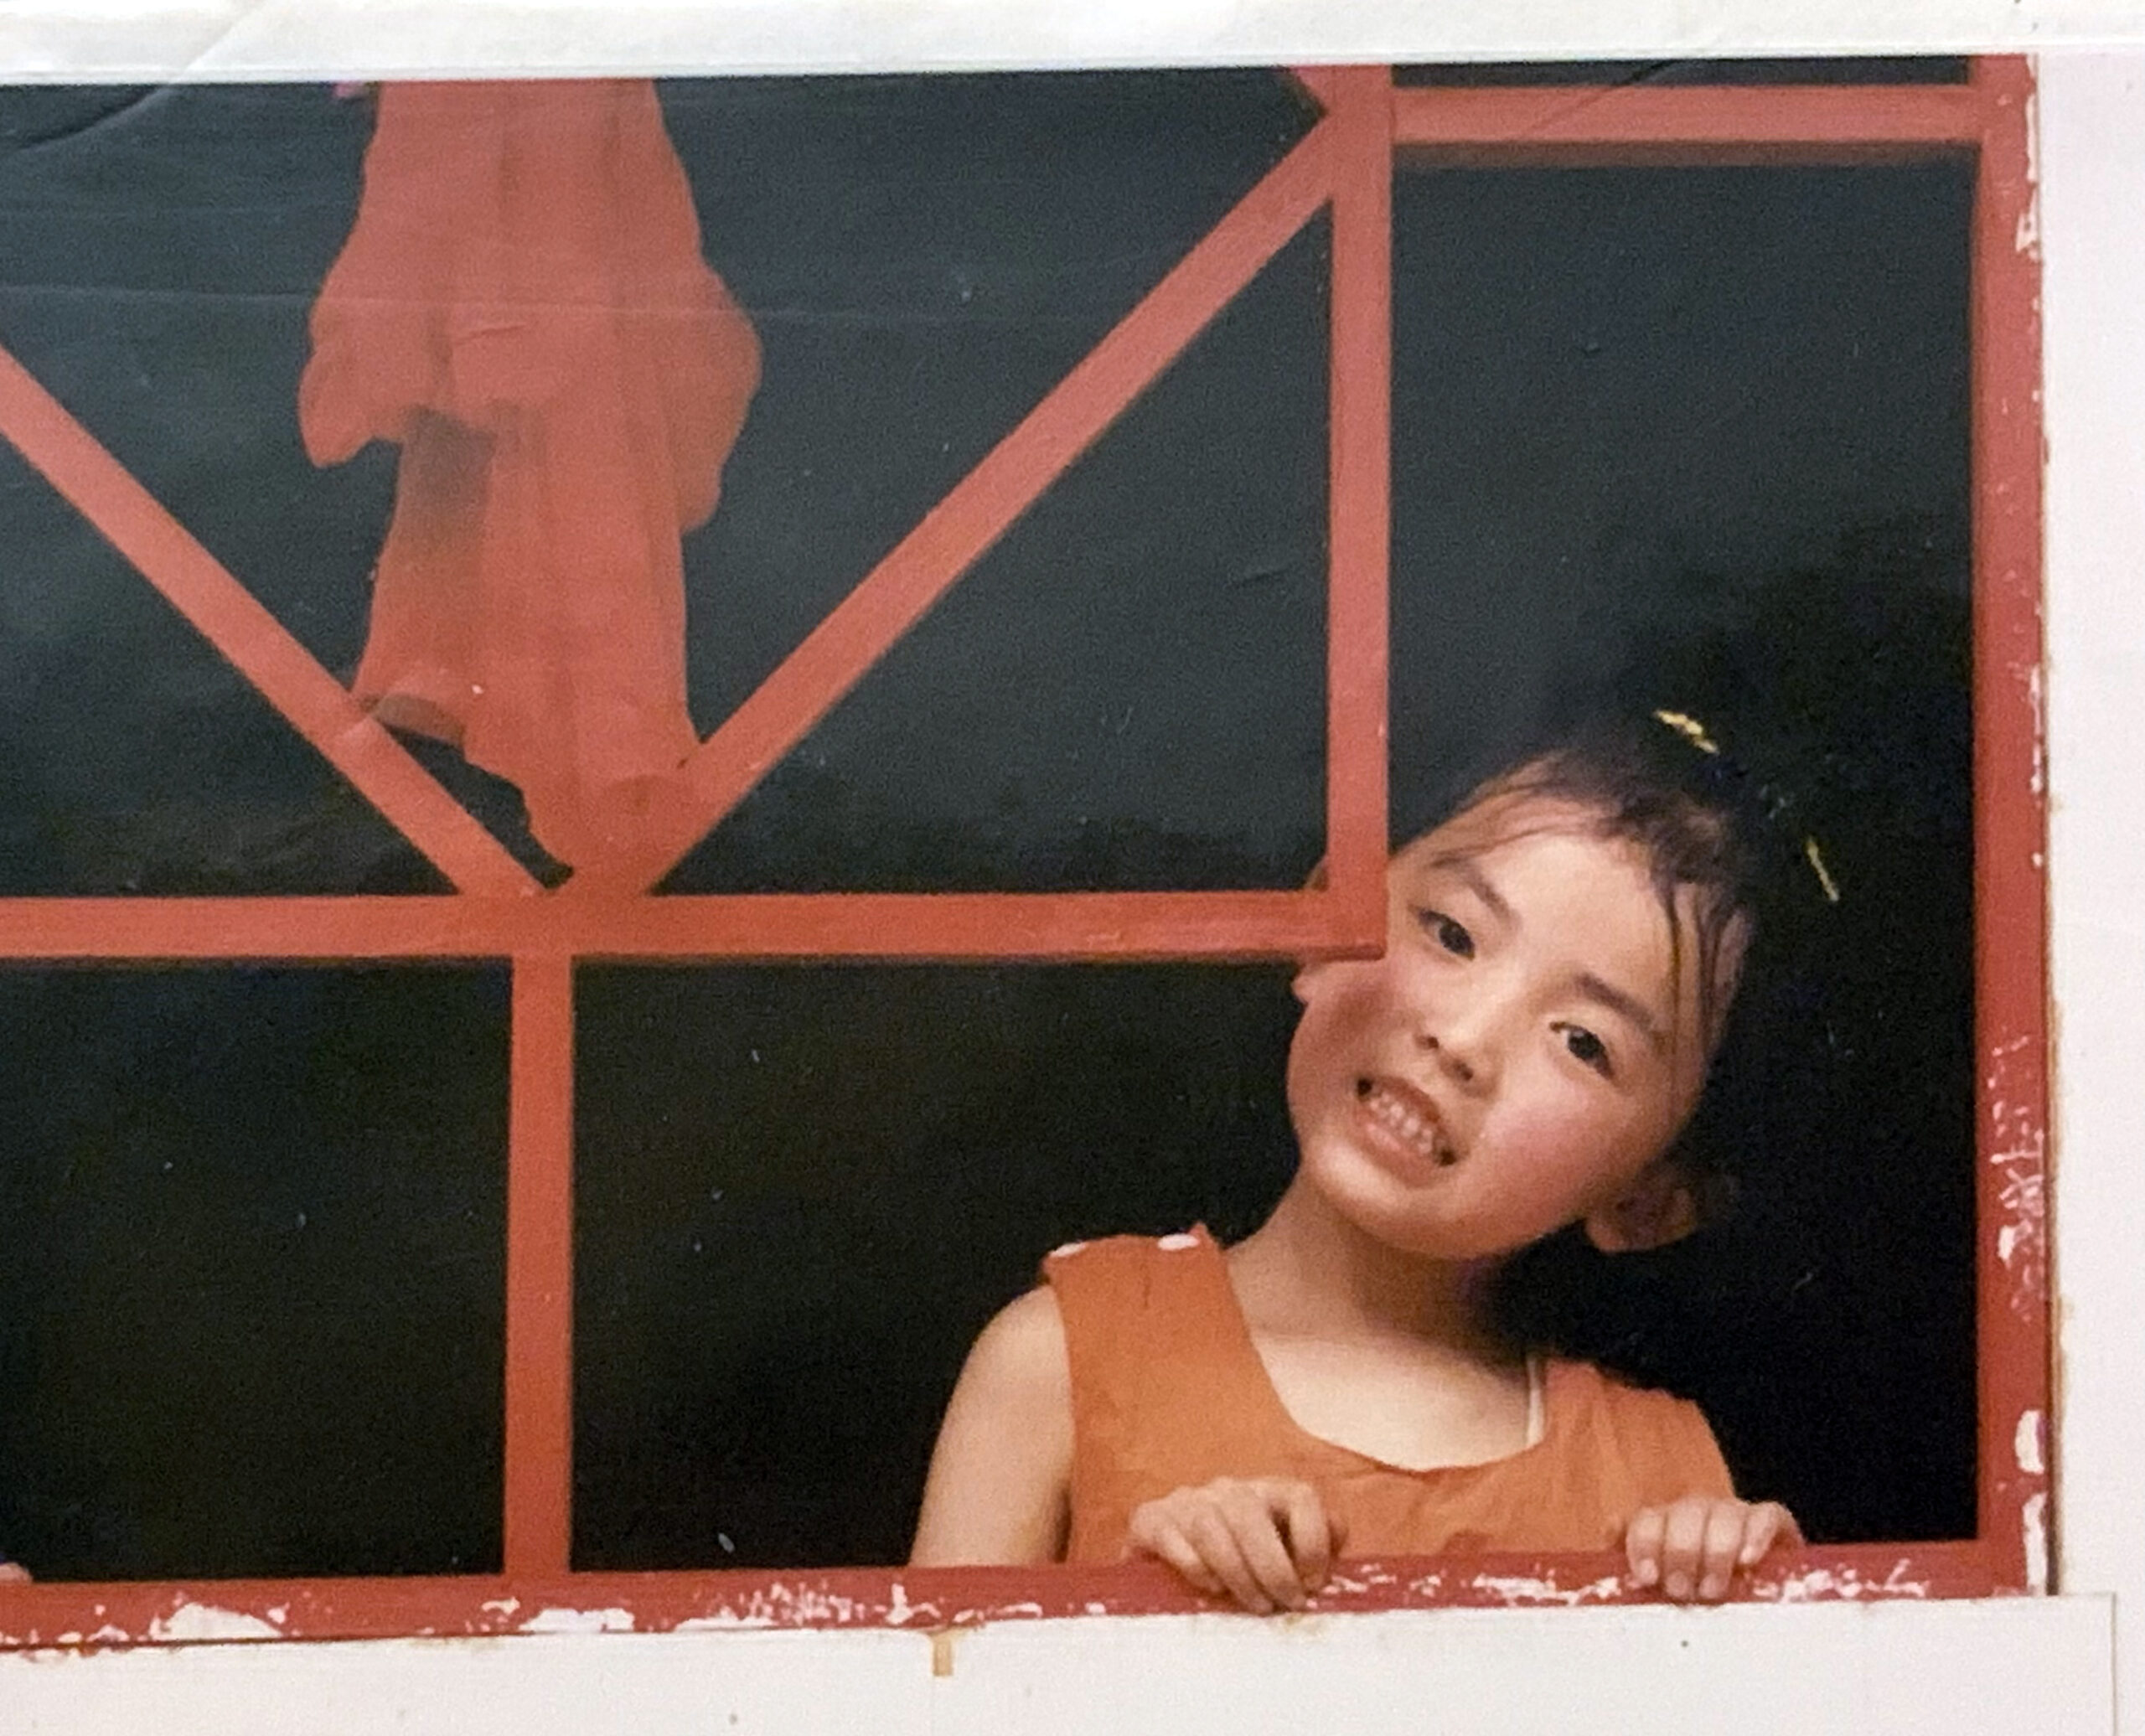 A young girl looks through a red window.